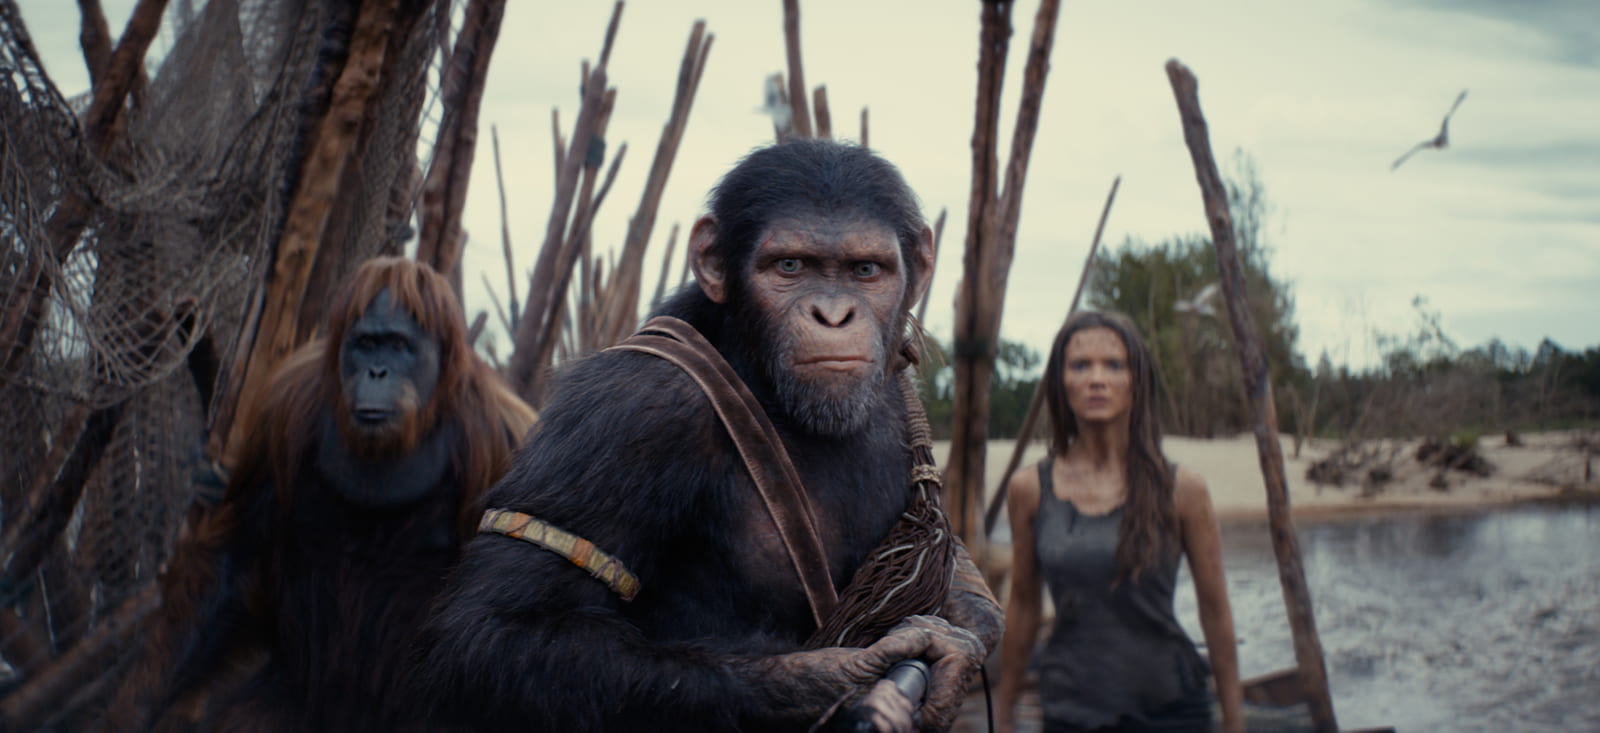 Peter Macon as Raka, Owen Teague as Noa, and Freya Allan as Nova in Wes Ball and Josh Friedman's action-adventure science-fiction film, Kingdom of the Planet of the Apes